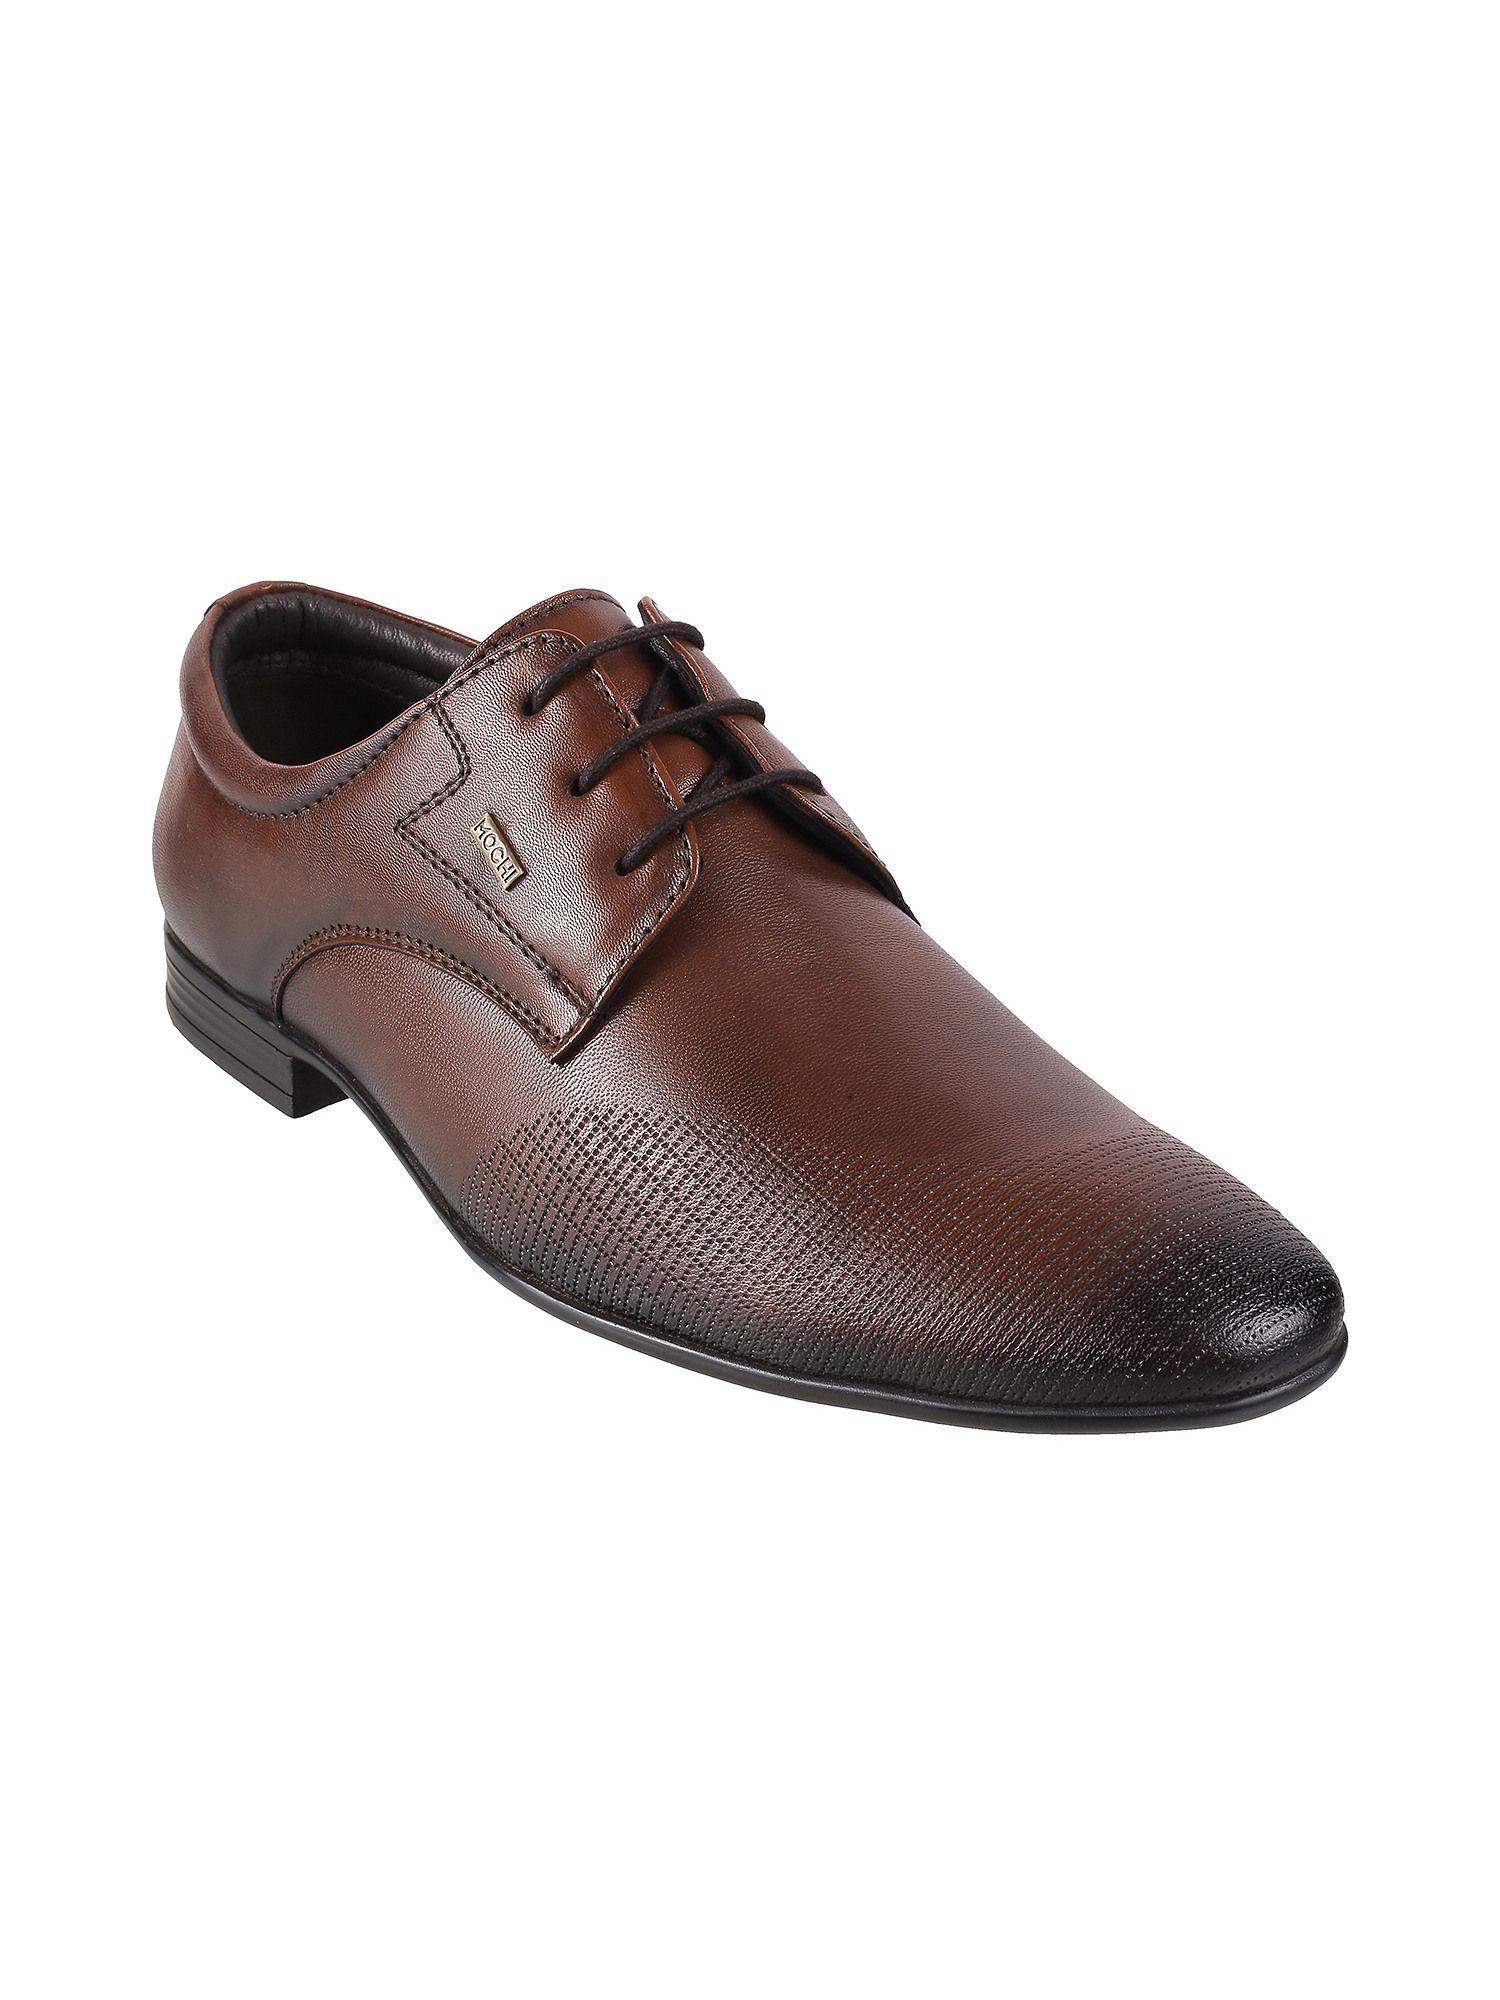 textured-tan-formal-shoes